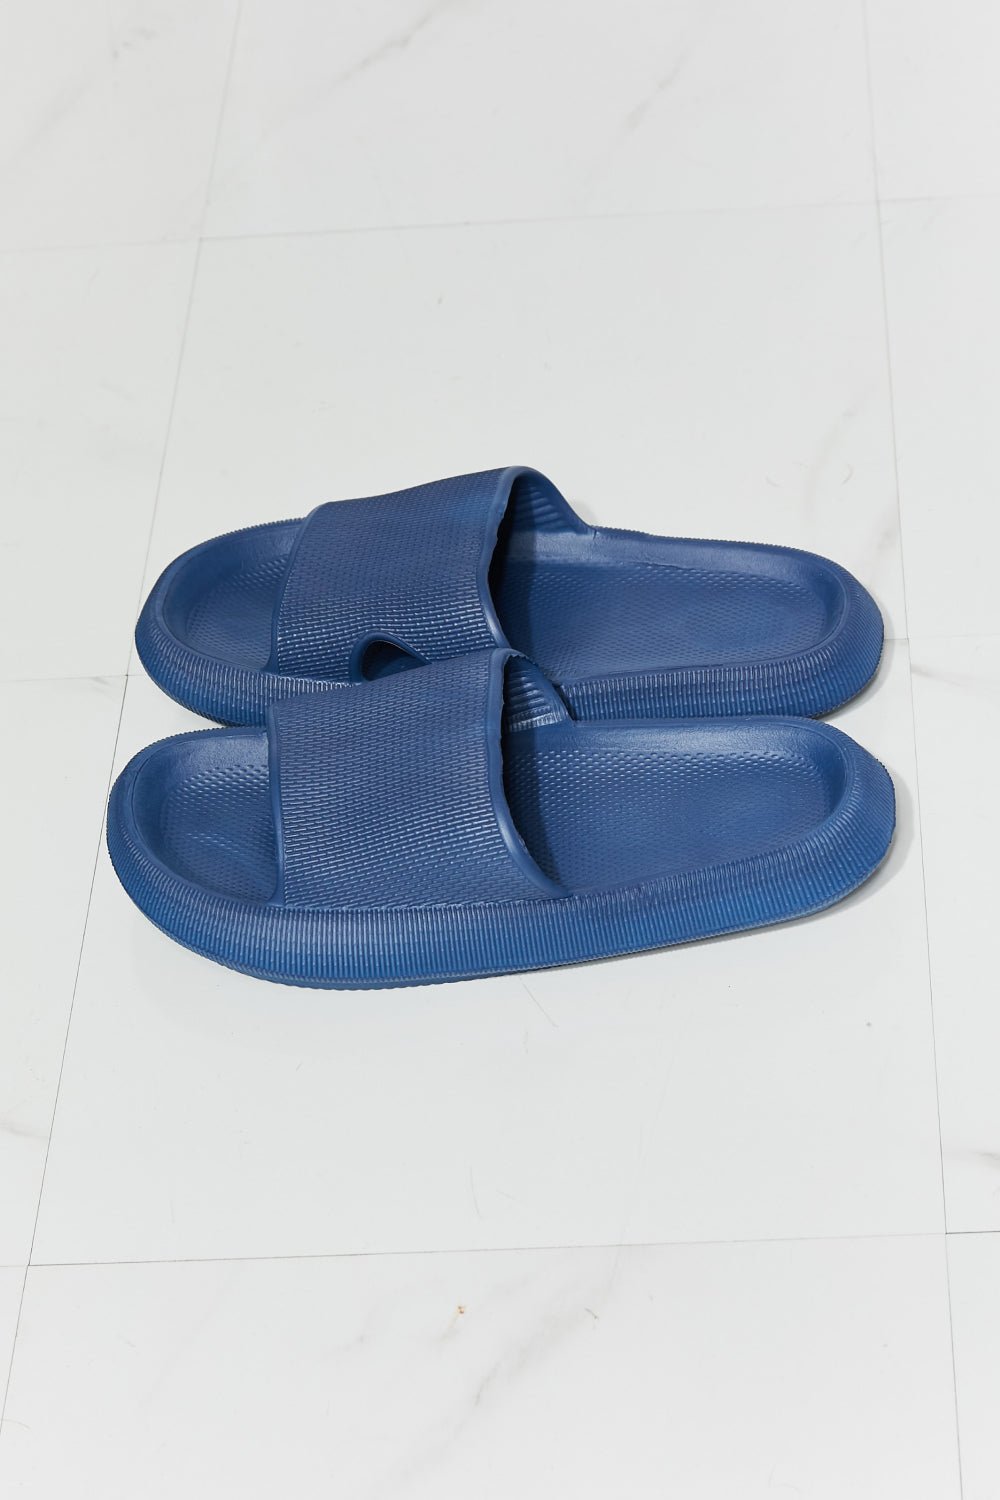 MMShoes Arms Around Me Open Toe Slide in Navy - T4x Quadruple Love